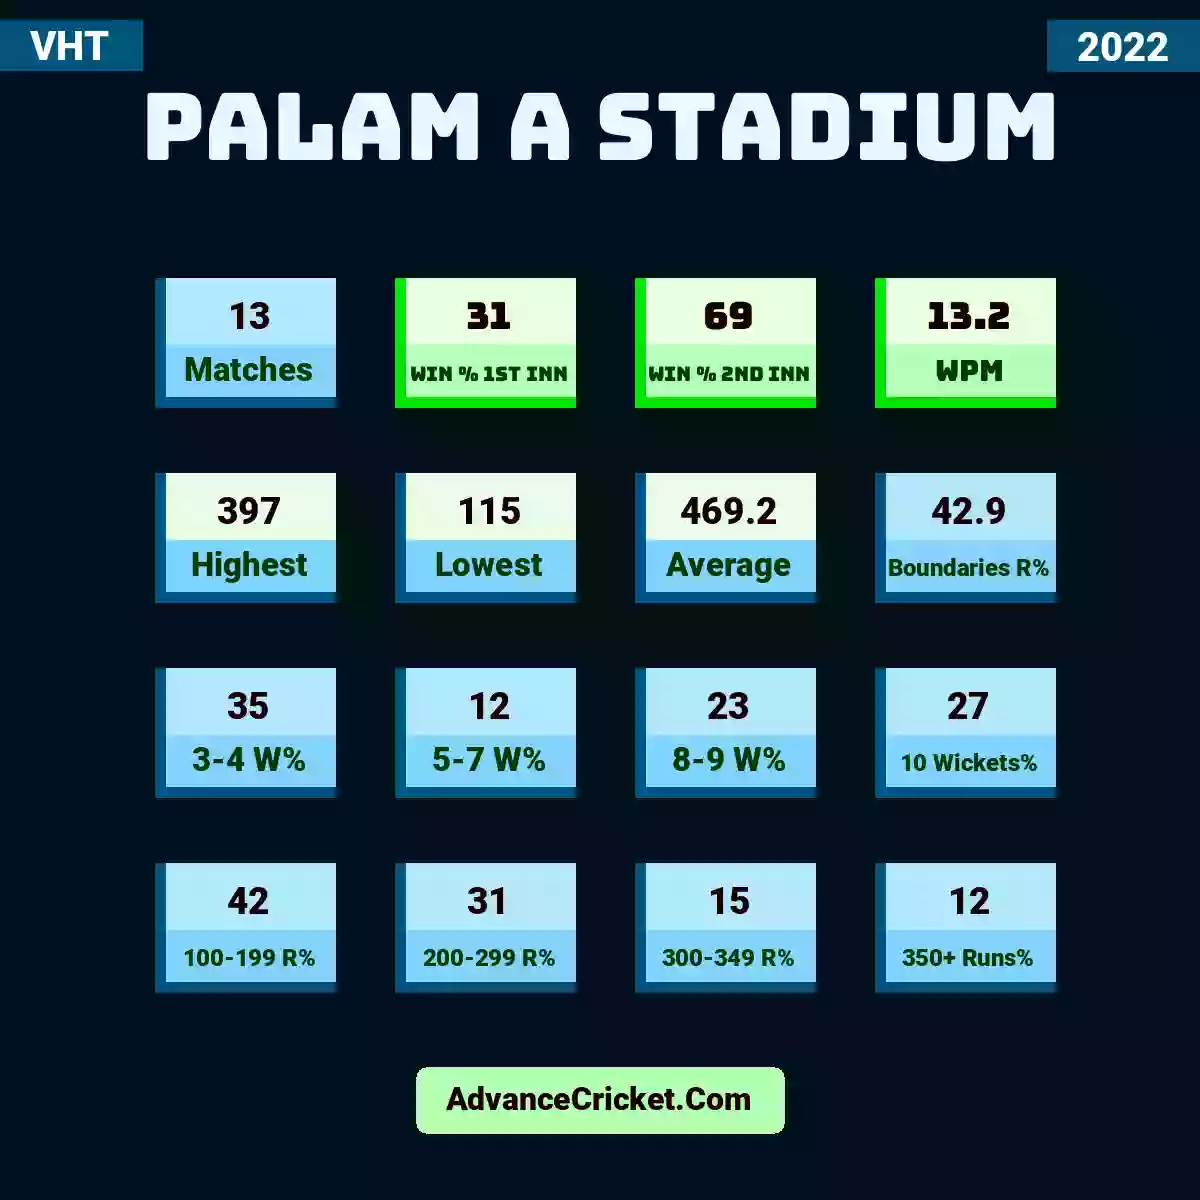 Image showing Palam A Stadium with Matches: 13, Win % 1st Inn: 31, Win % 2nd Inn: 69, WPM: 13.2, Highest: 397, Lowest: 115, Average: 469.2, Boundaries R%: 42.9, 3-4 W%: 35, 5-7 W%: 12, 8-9 W%: 23, 10 Wickets%: 27, 100-199 R%: 42, 200-299 R%: 31, 300-349 R%: 15, 350+ Runs%: 12.